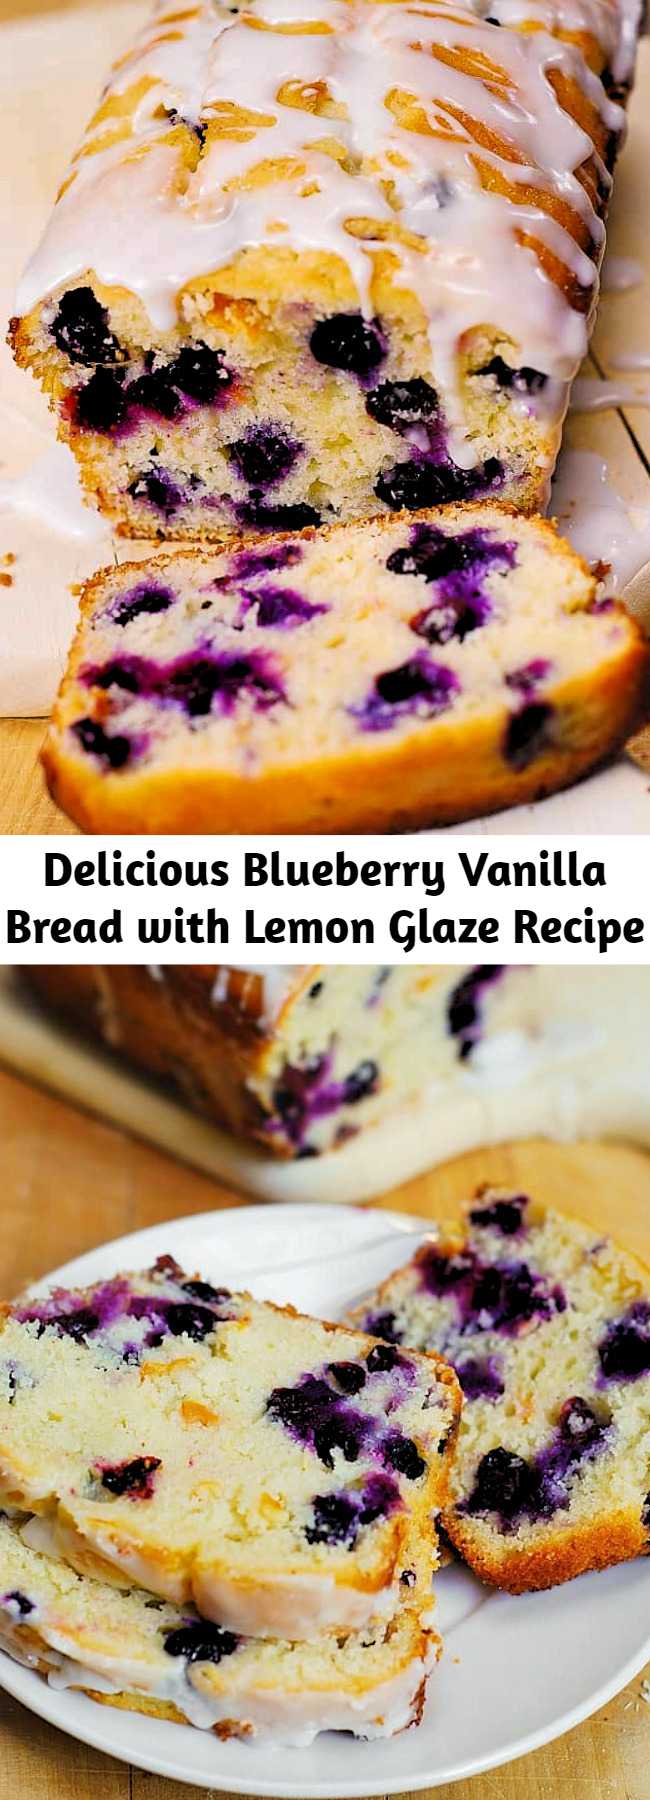 This delicious blueberry lemon bread with lemon glaze is a perfect breakfast, brunch, snack.  Simple recipe, beautiful cake, what more can you ask for?!   Lemon zest, freshly squeezed lemon juice, blueberries, vanilla - so many Summer flavors!